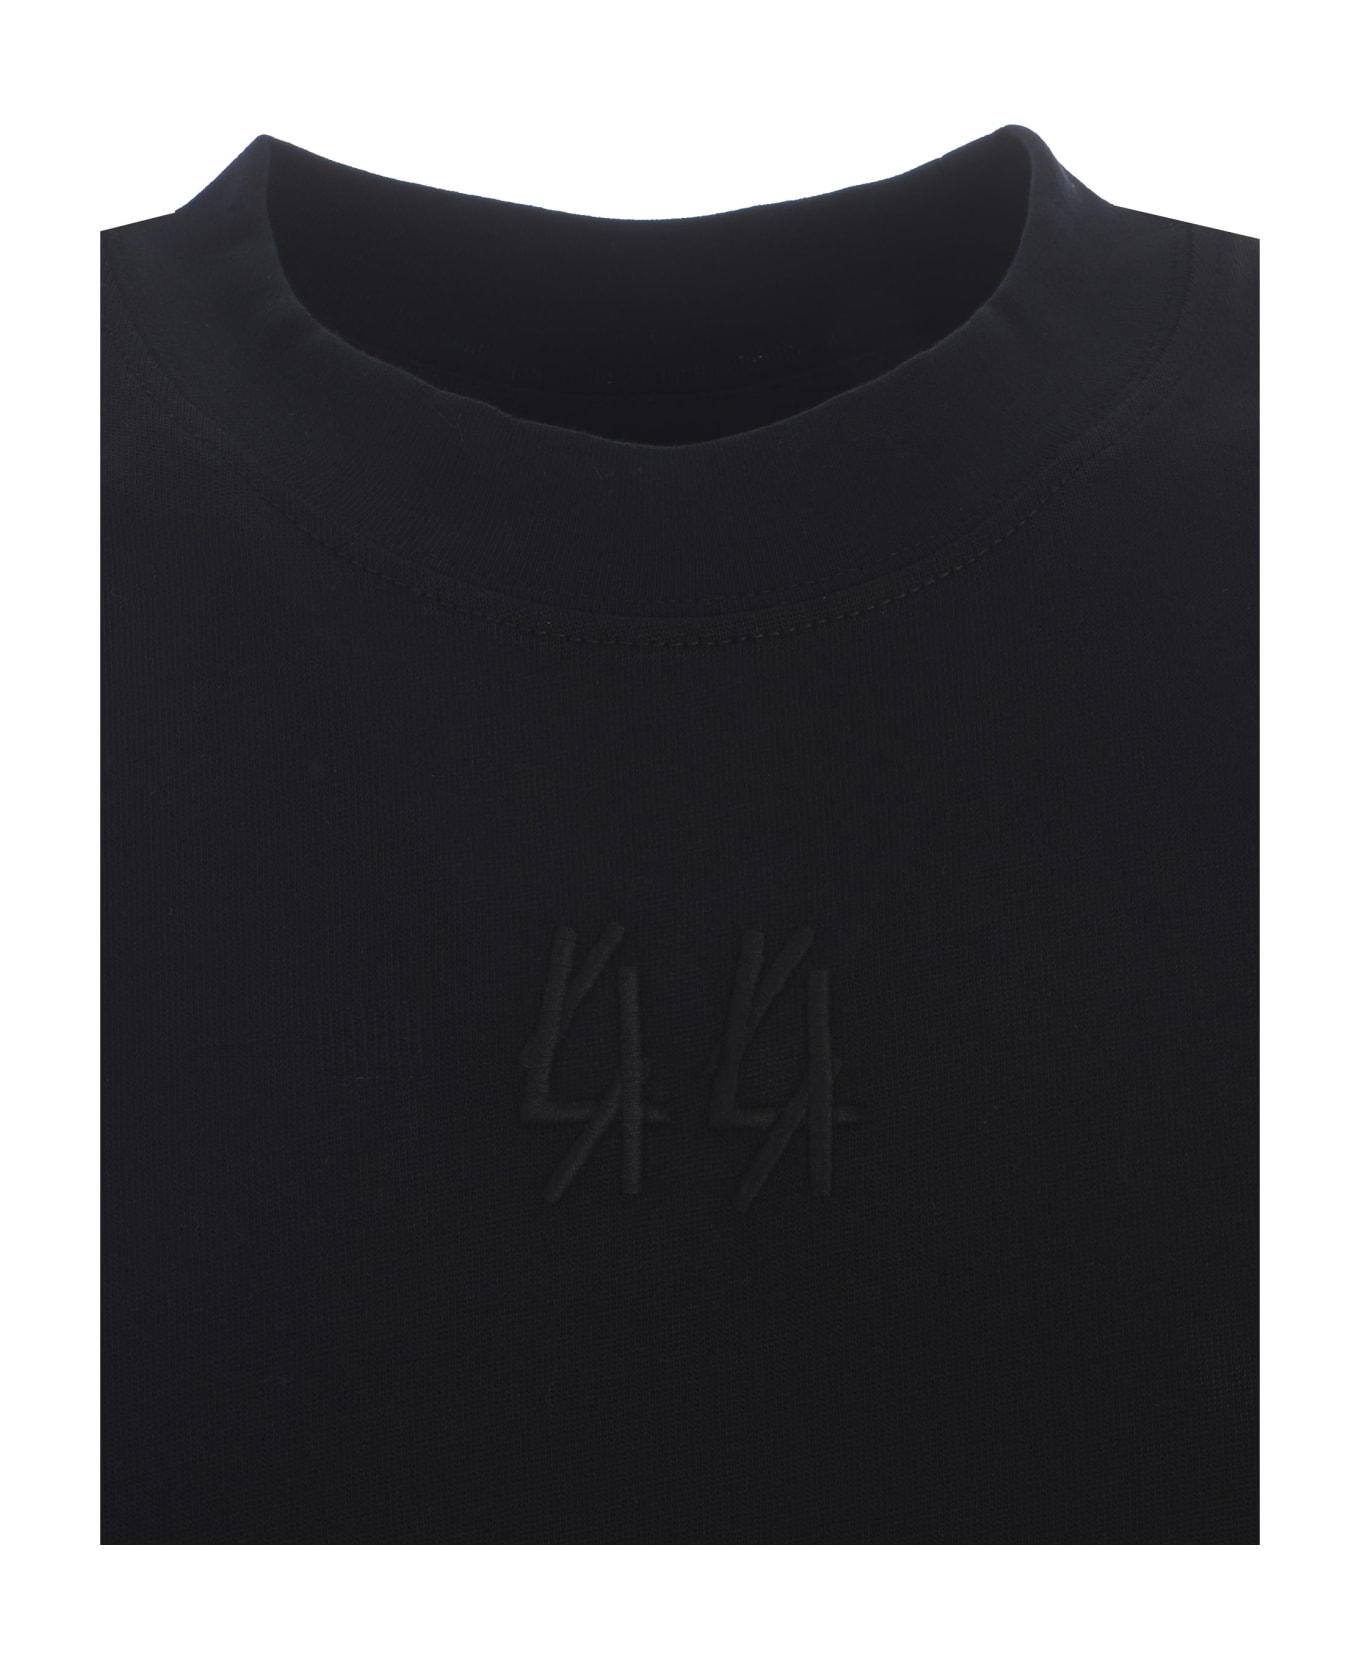 44 Label Group T-shirt 44label Group Made Of Cotton - Nero